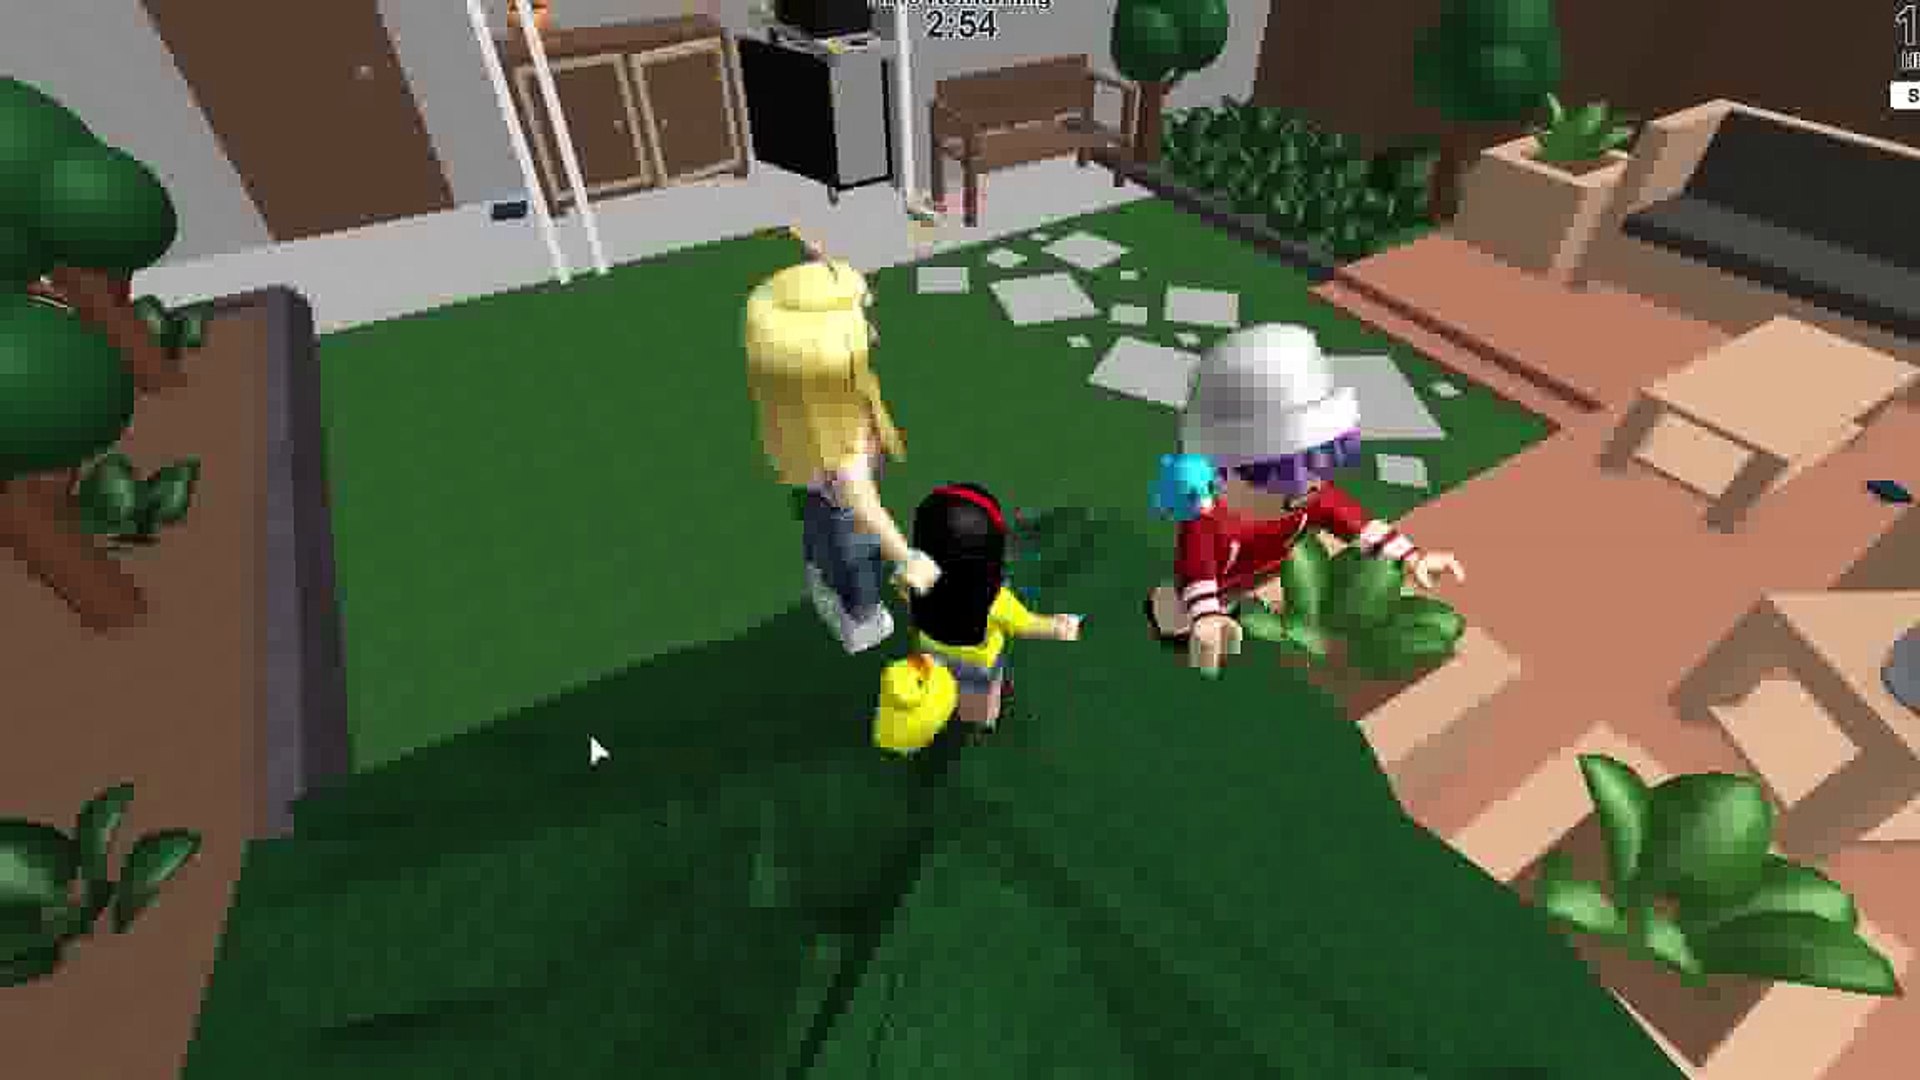 Roblox Extreme Hide And Seek Audrey Knows All The Secret Spots With Radiojh Games Au Dailymotion Video - roblox extreme hide and seek audrey knows all the secret spots